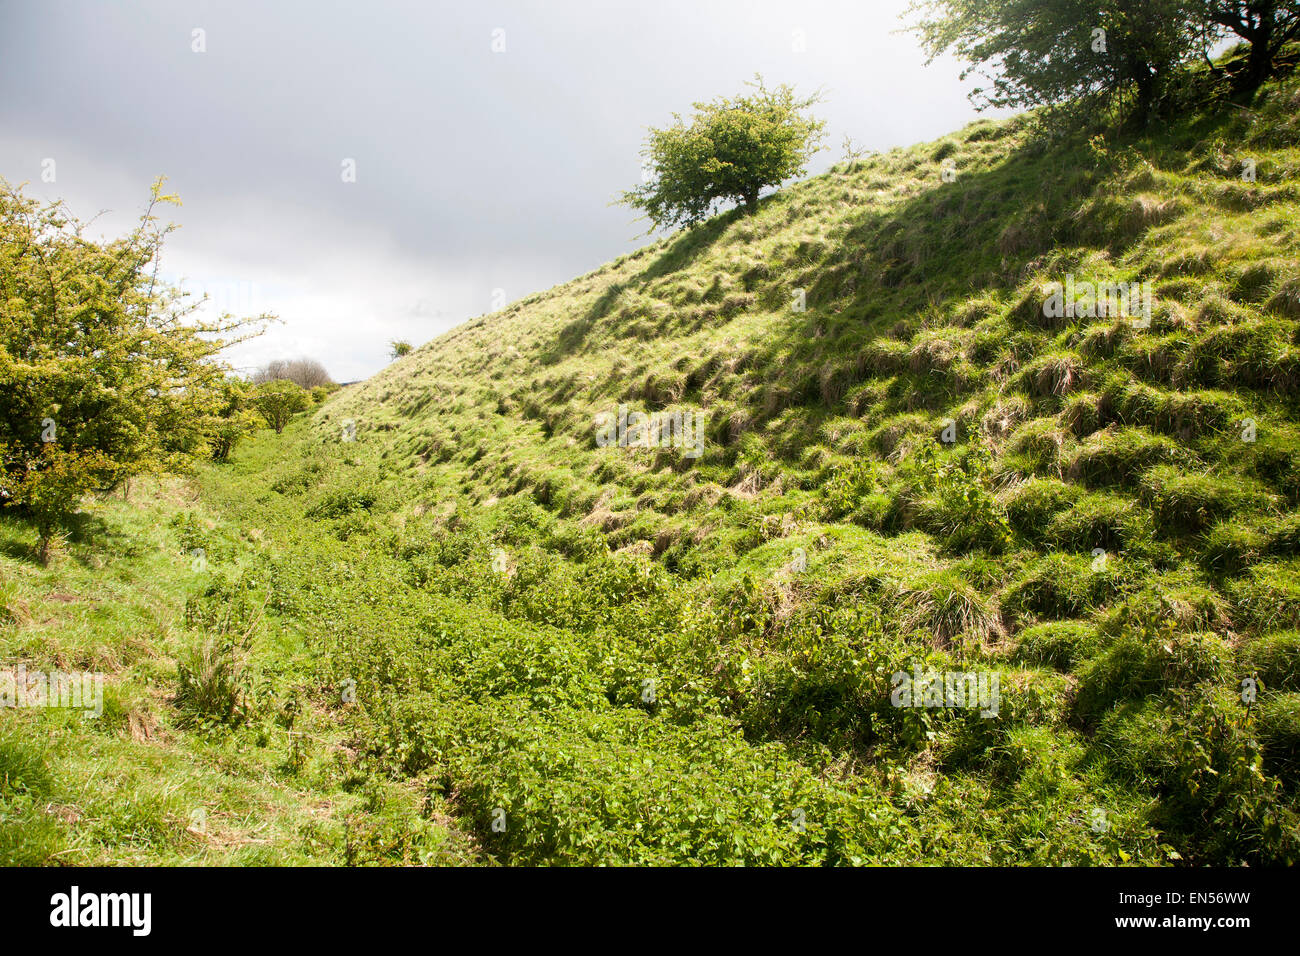 Ditch and embankment of the Wansdyke a Saxon defensive structure on All Cannings chalk downs near Tan Hill, Wiltshire, England Stock Photo